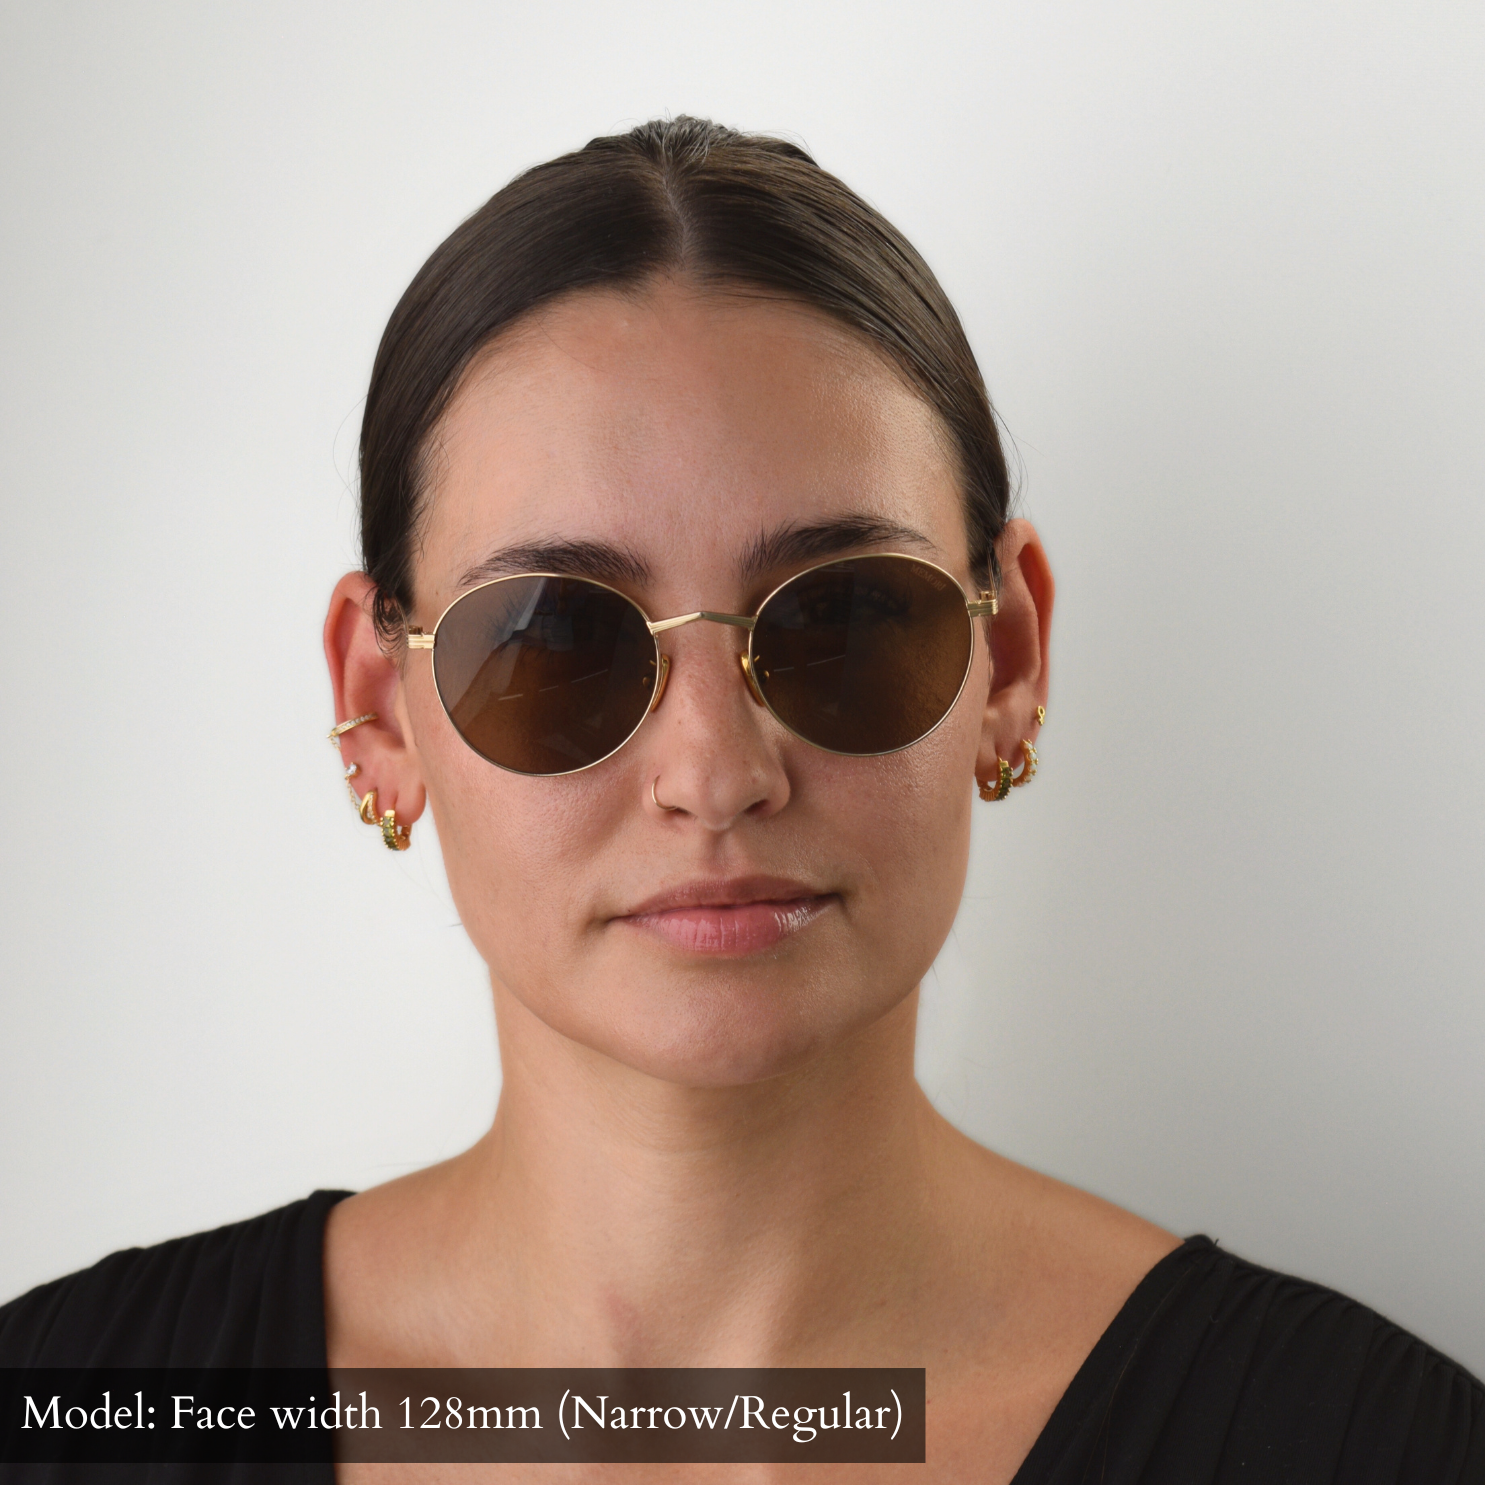 Model with 128mm width face (which falls into Narrow/Regular category) wearing the gold round Memorí sunglasses with brown lenses. 